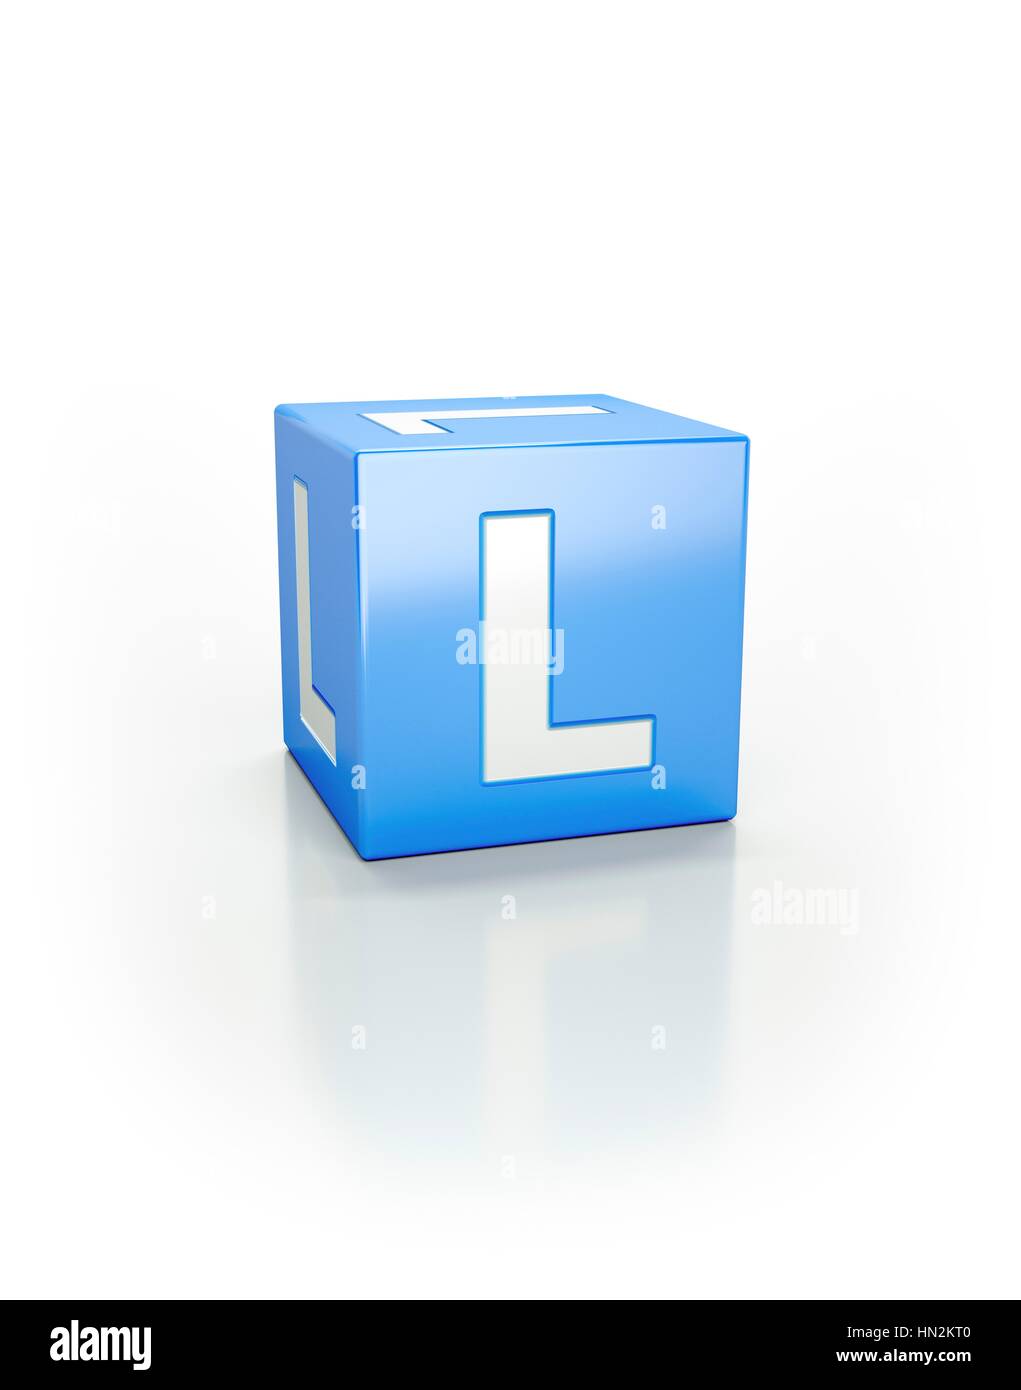 Blue cube with letter L Stock Photo - Alamy